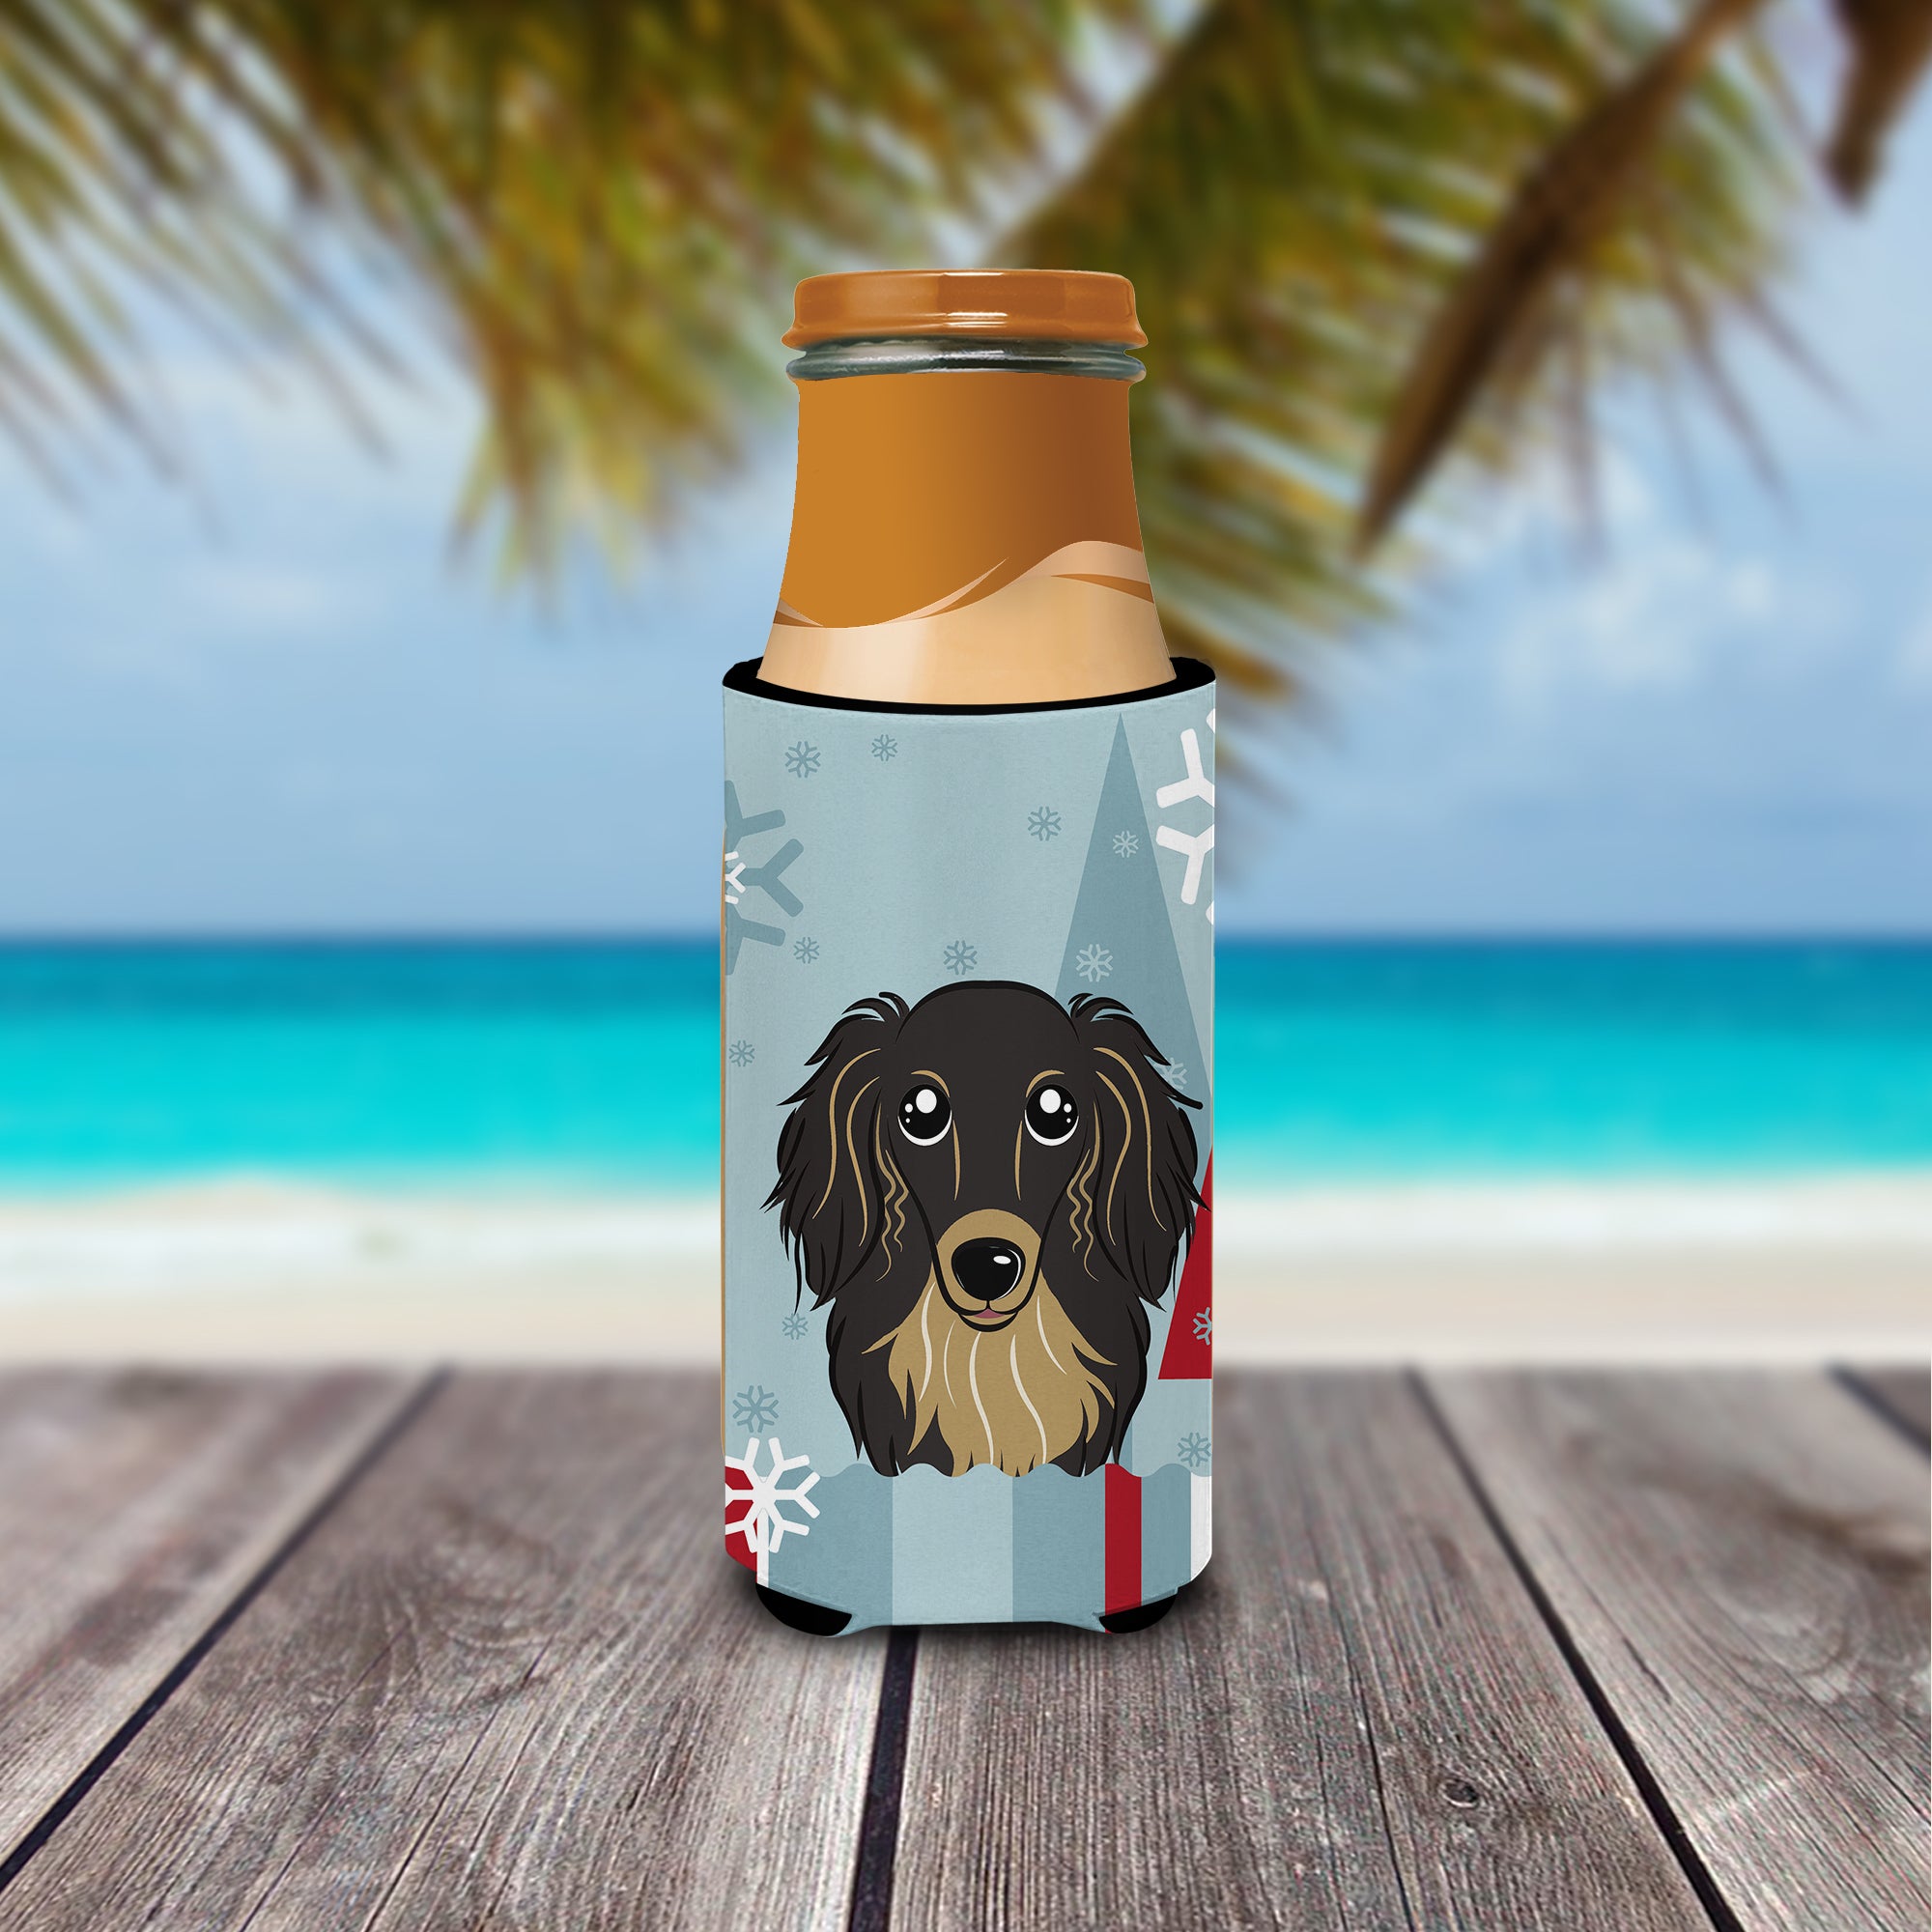 Winter Holiday Longhair Black and Tan Dachshund Ultra Beverage Insulators for slim cans BB1709MUK